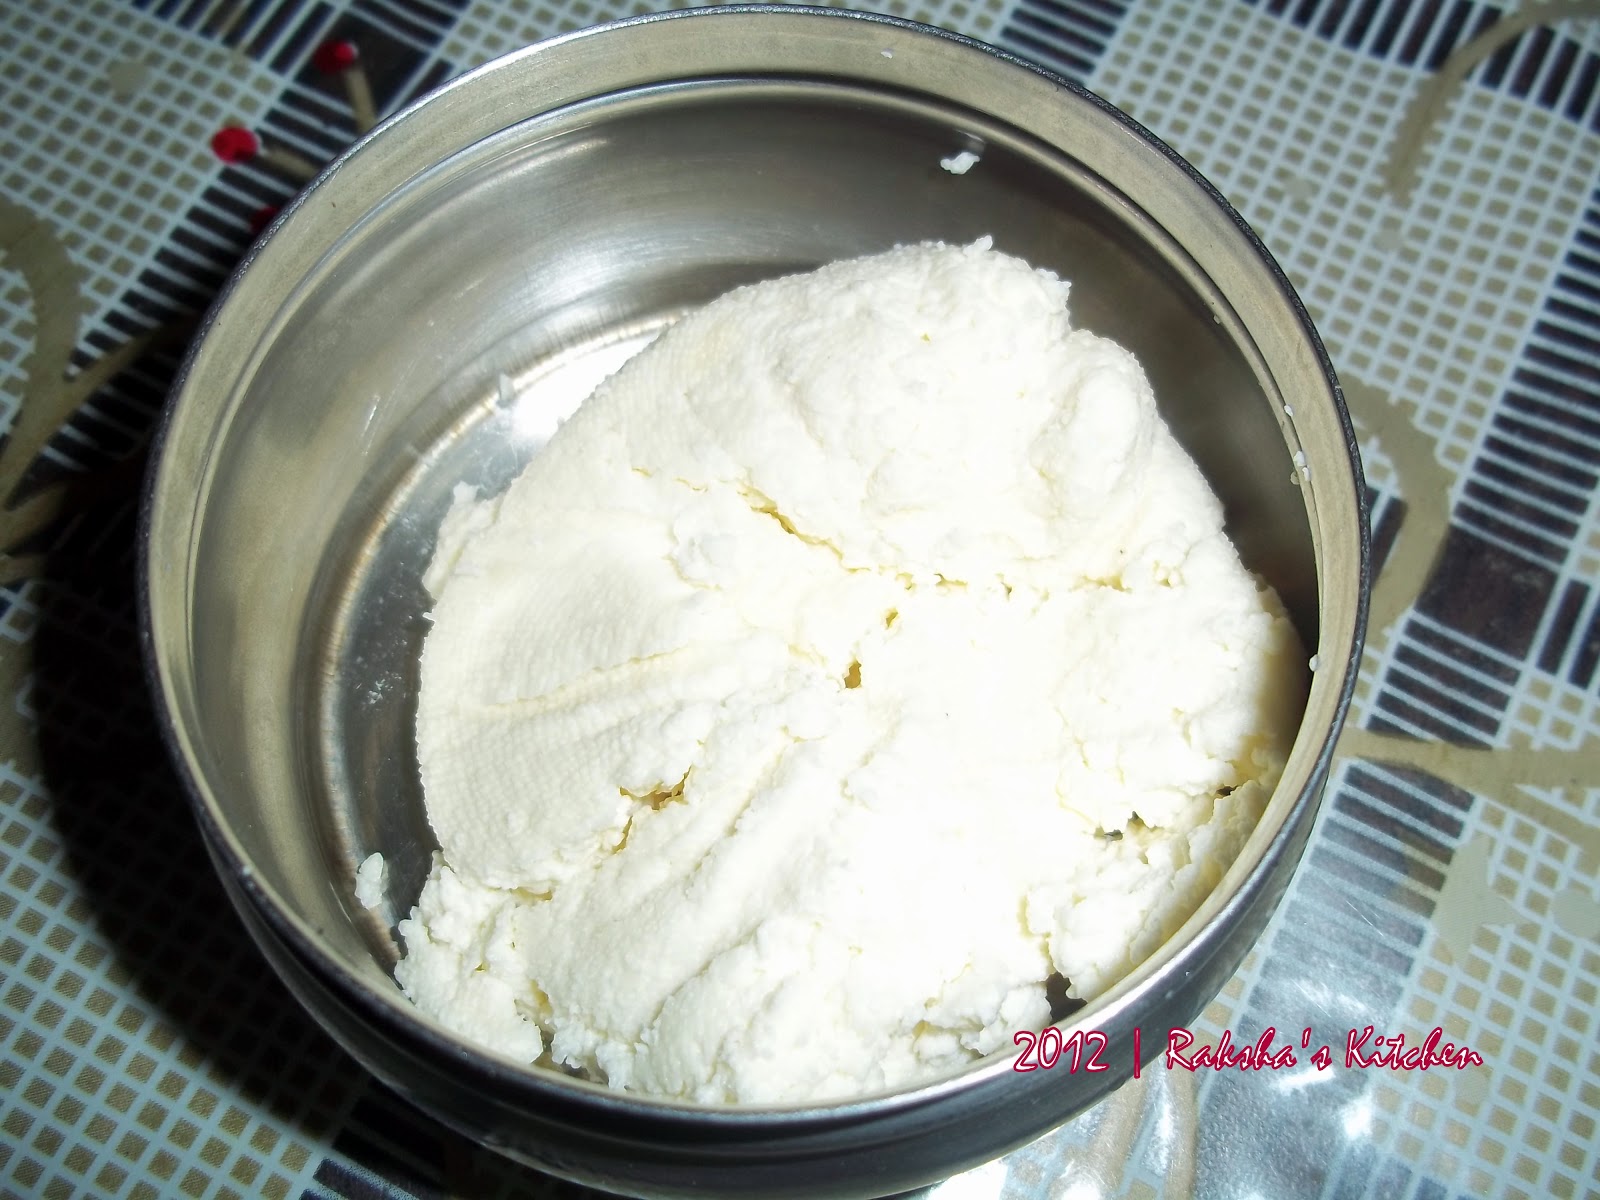 Step by step instructions to make paneer or Indian cottage cheese